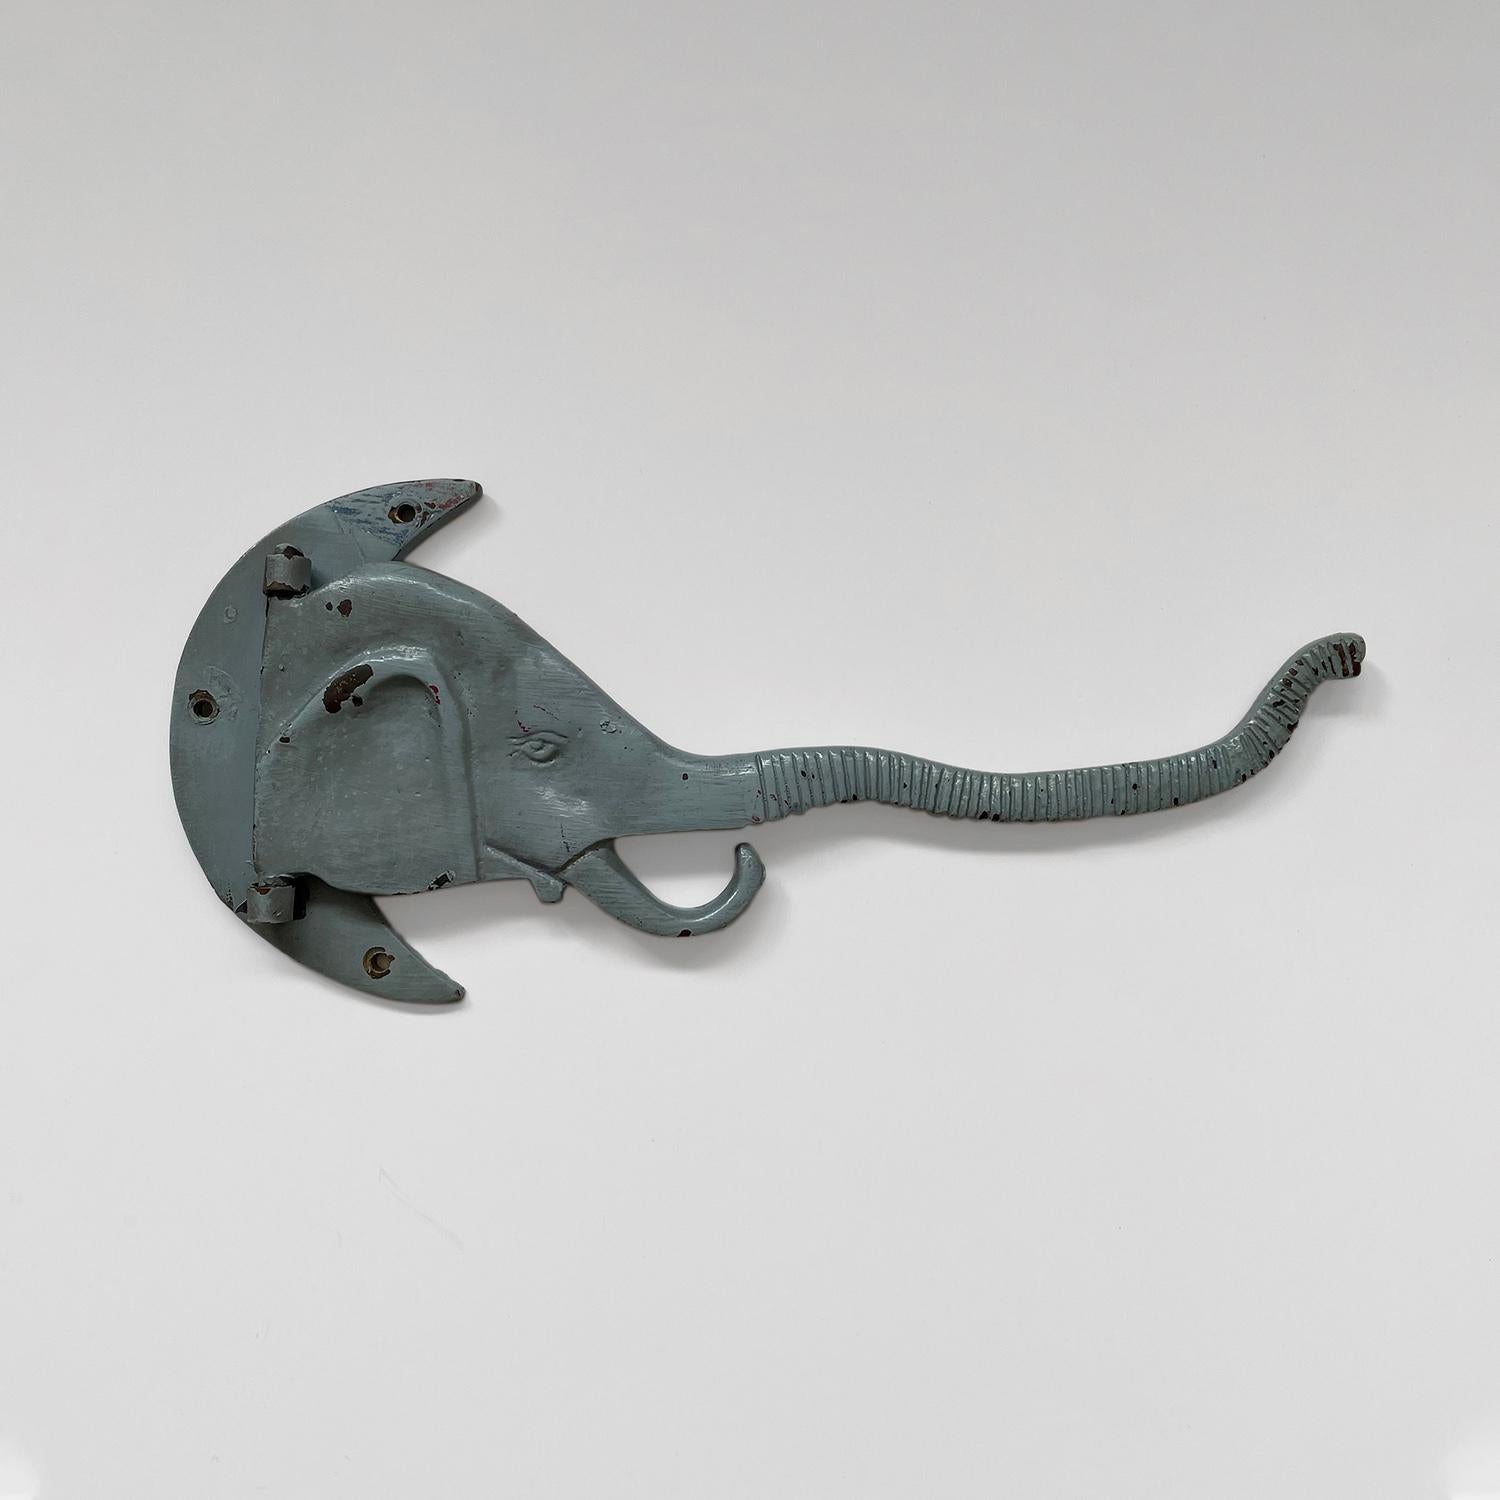 Antique cast iron articulating wall hook
Early 20th century
This piece is a work of art
The long articulating elephant trunk serves as a light weight storage hook which puts the fun in functional
Wall mounted hook is supported by a single crescent